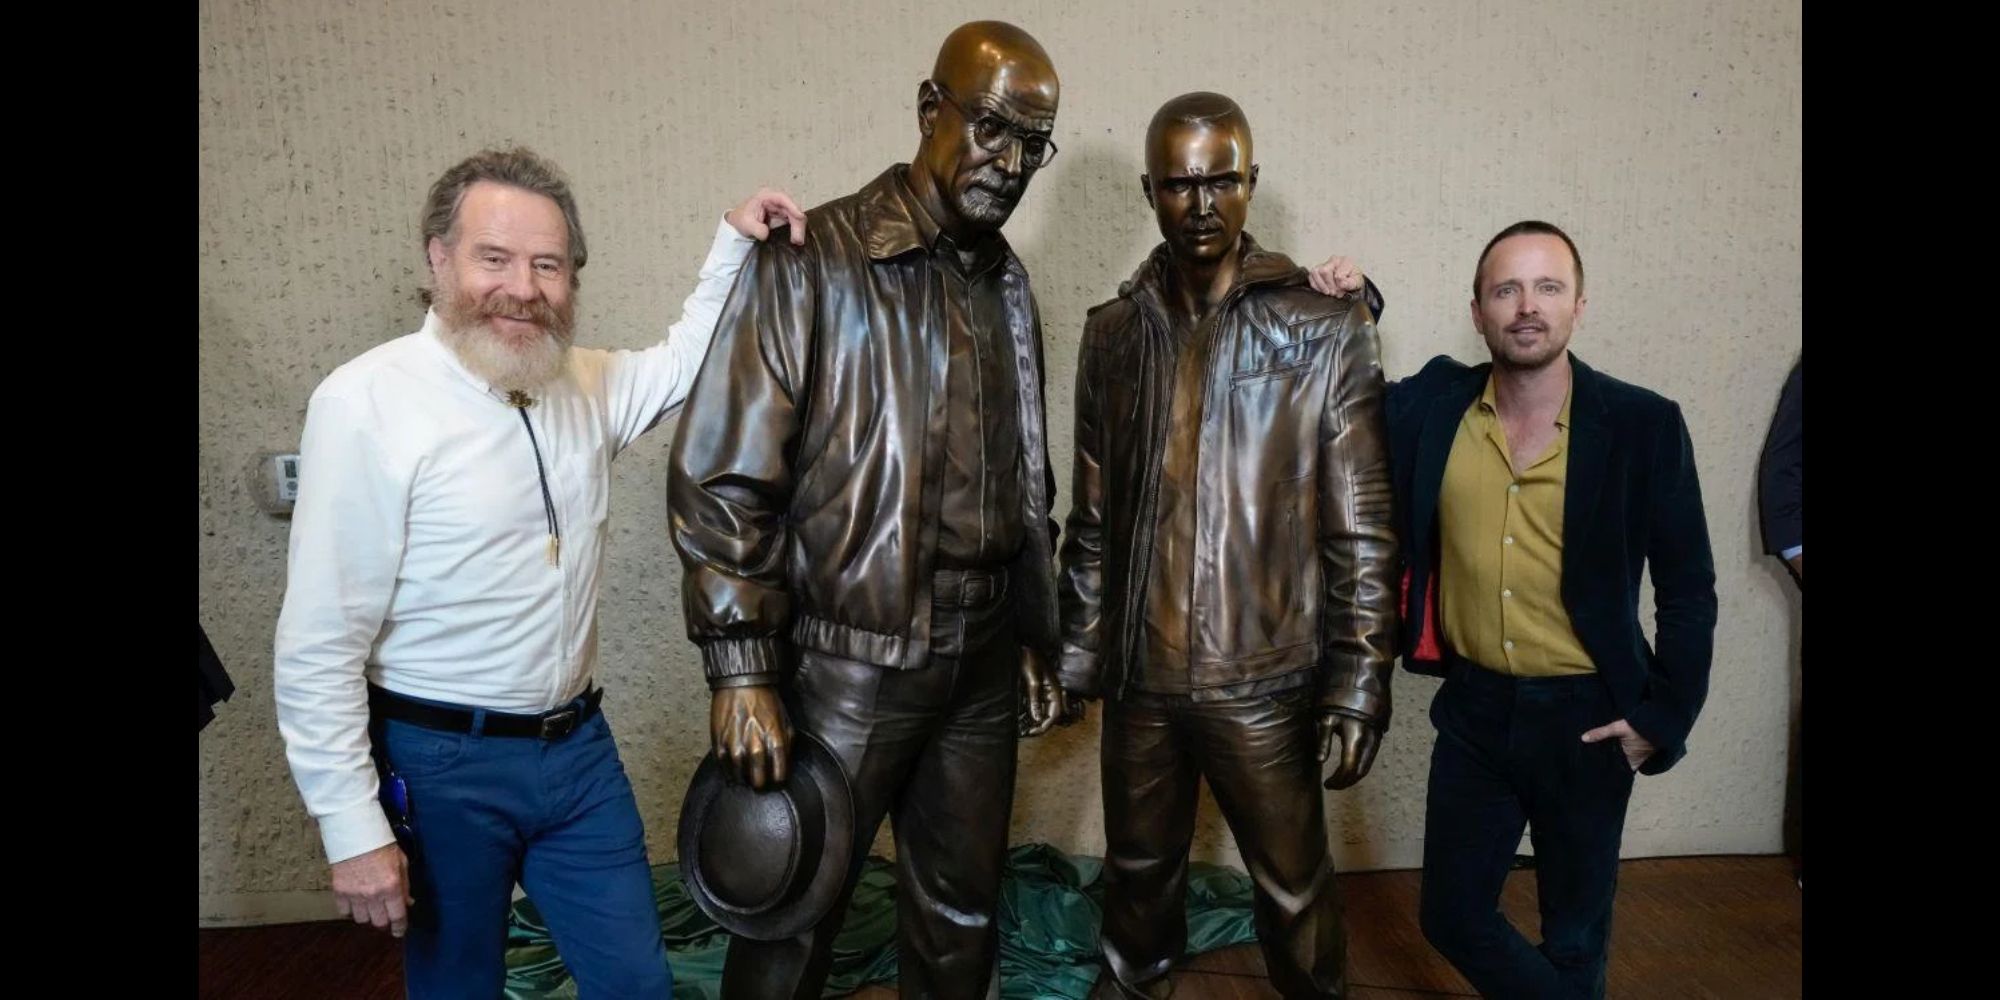 Statues of Walter White and Jesse Pinkman next to Bryan Cranston and Aaron Paul